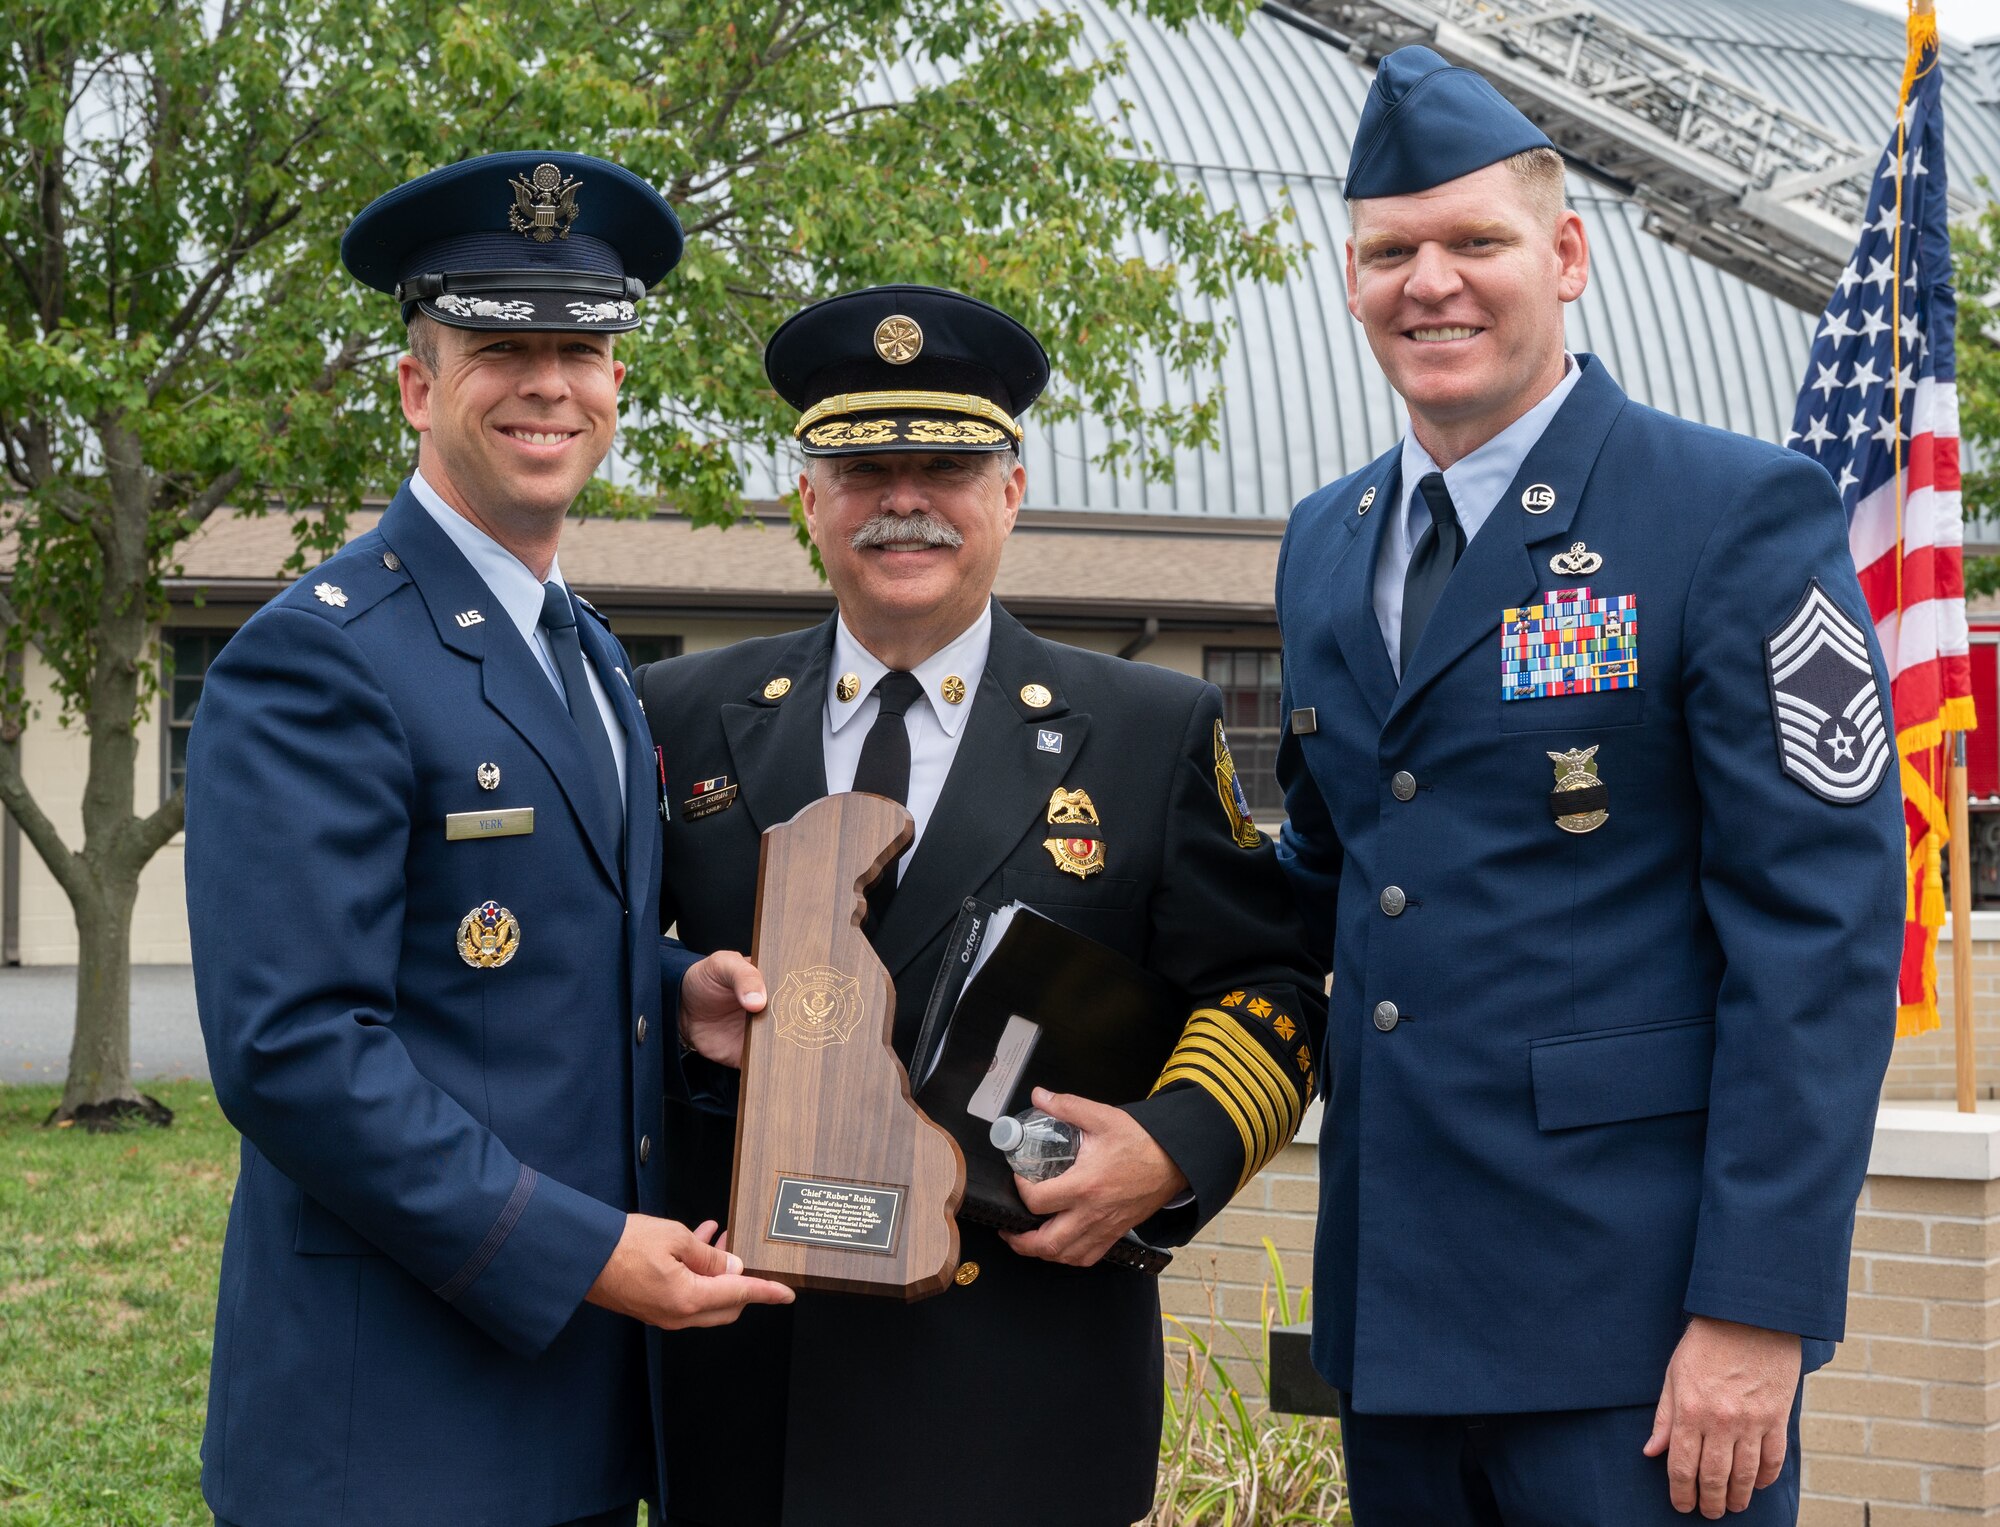 Lt. Col. Joshua Yerk, 436th Civil Engineer Squadron commander, left, and Chief Master Sgt. Andrew Kehl, 436th CES fire chief, right, present a plaque to Dennis Rubin, former Washington D.C. fire chief, during the 21st Anniversary 9/11 Memorial Ceremony held at the Air Mobility Command Museum on Dover Air Force Base, Delaware, Sept. 11, 2022. Rubin was the guest speaker during the ceremony which commemorated those who perished in the attacks on Sept. 11, 2001. (U.S. Air Force photo by Senior Airman Cydney Lee)